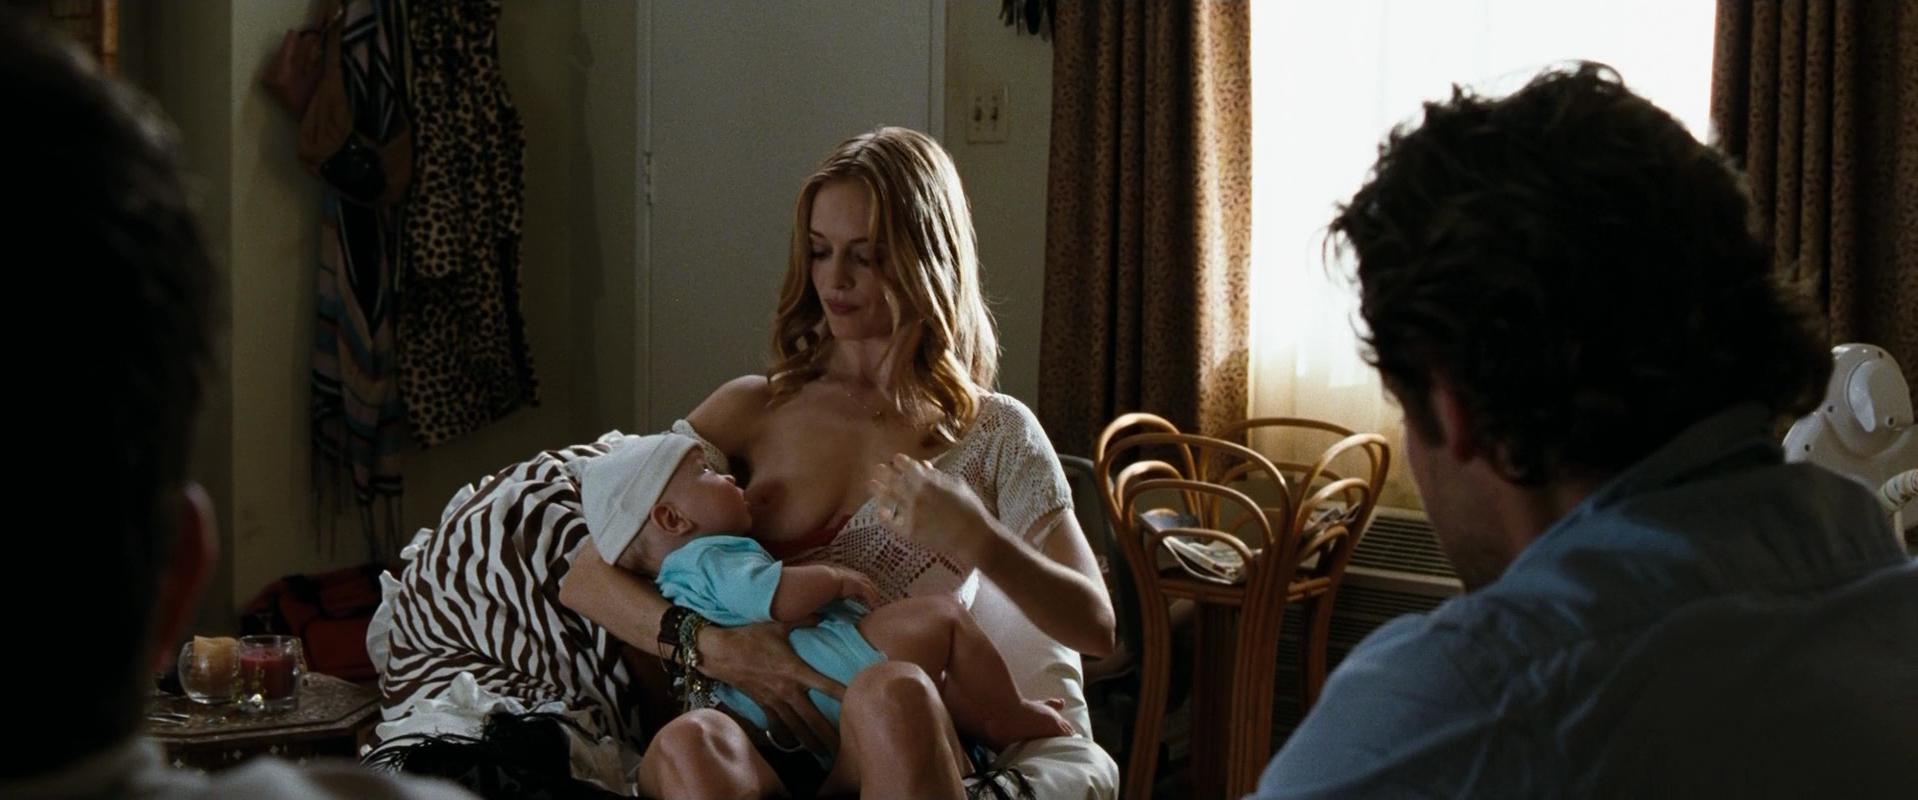 Heather Graham nude – The Hangover (2009) - Celebs Roulette Tube